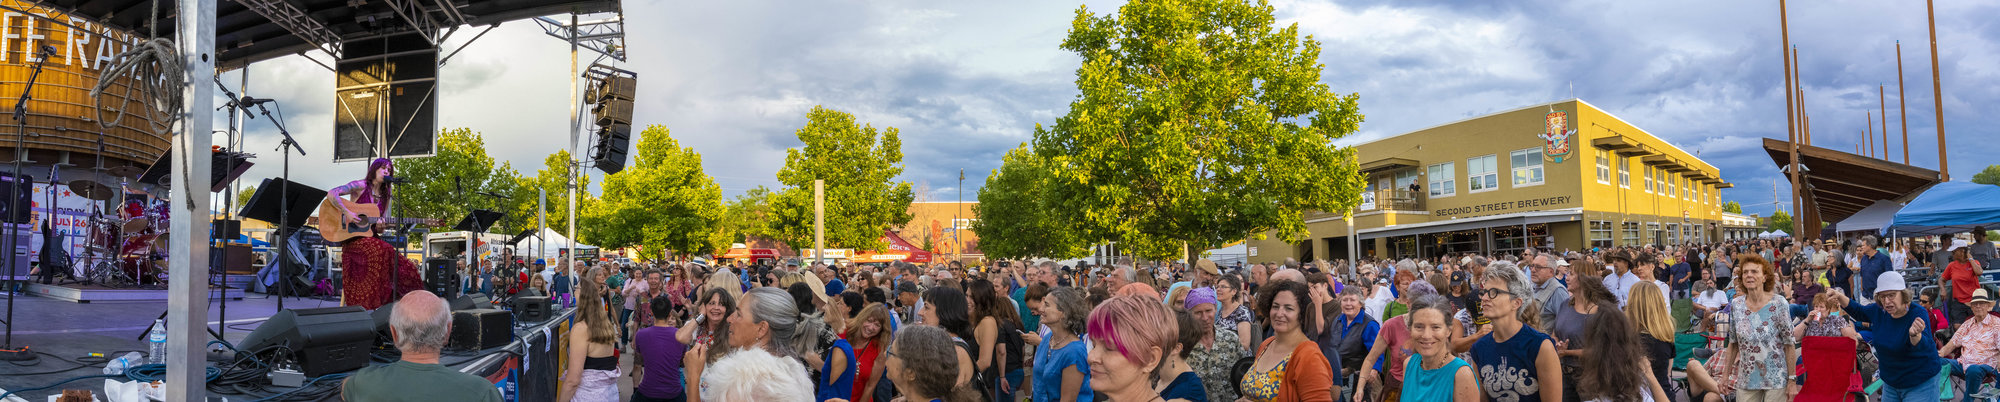 Panorama of Best of Santa Fe 2019 Aretha Franklin tribute concert